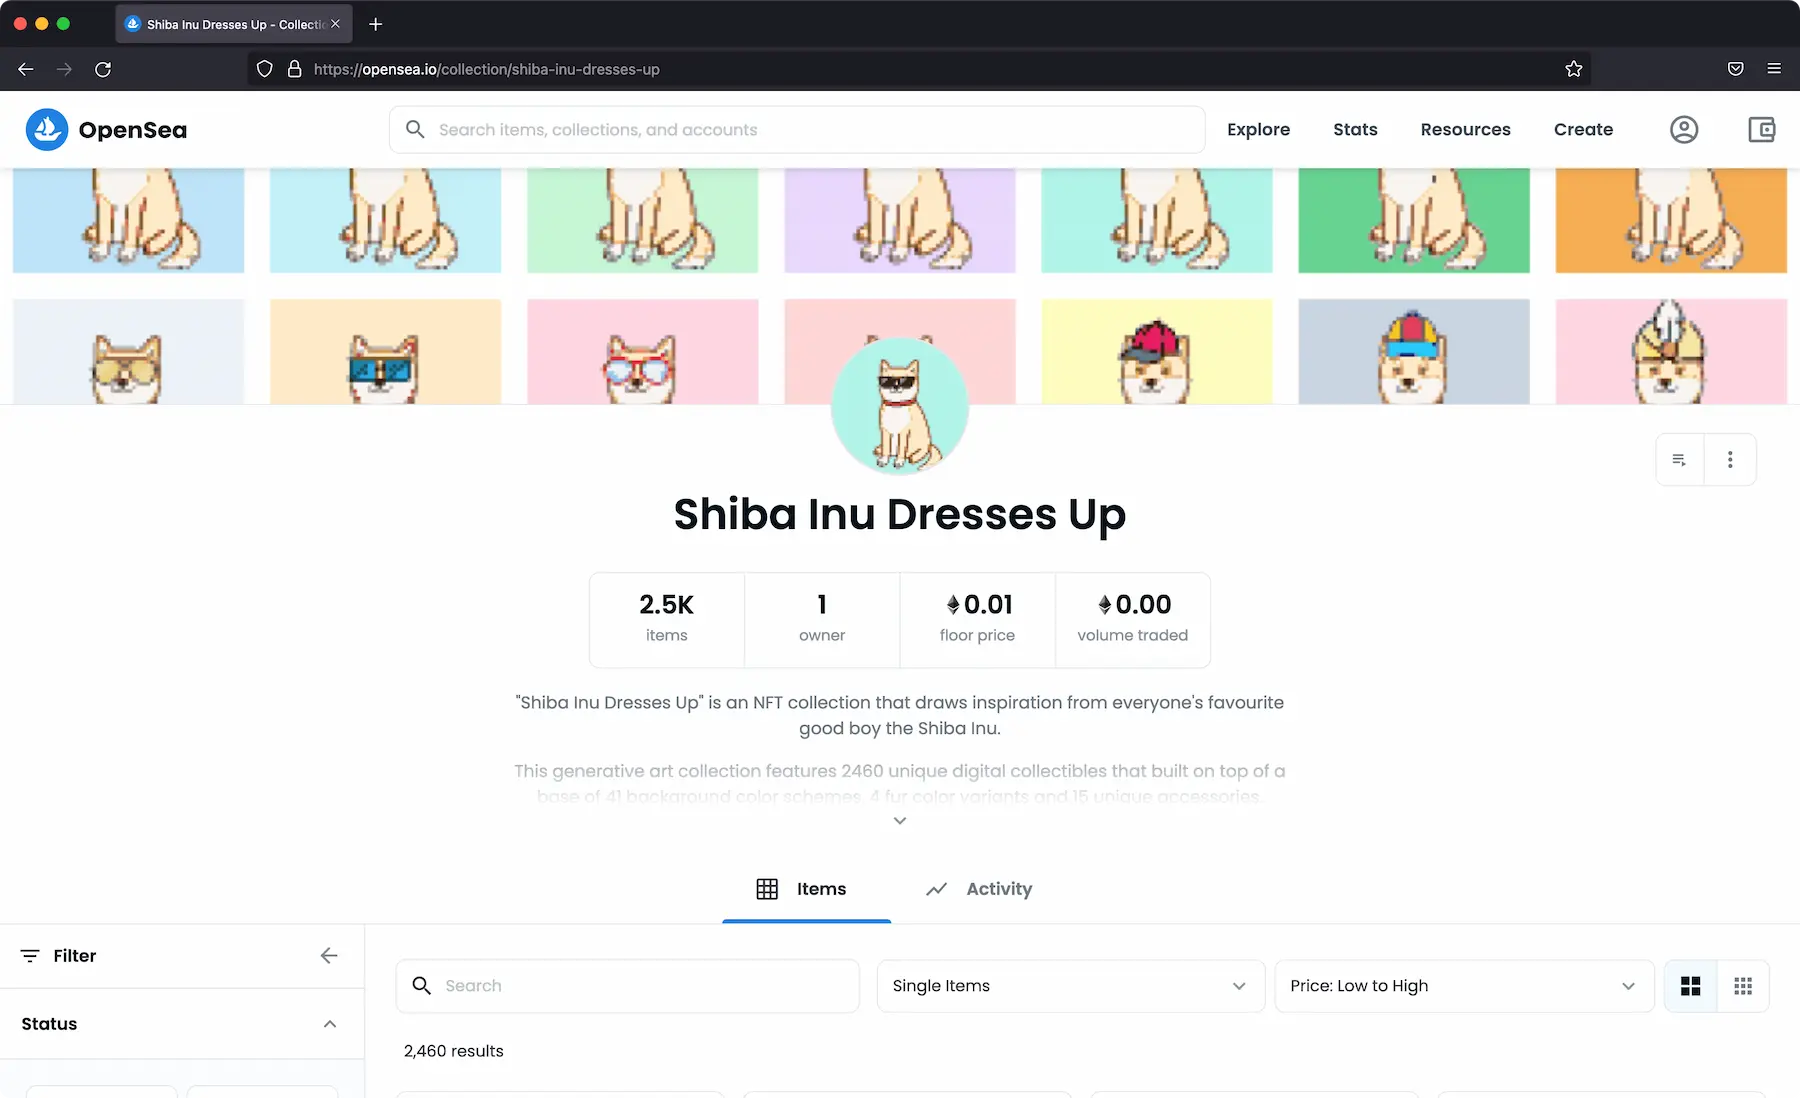 Screenshot of the Shiba Inu Dresses Up Collection on Opensea